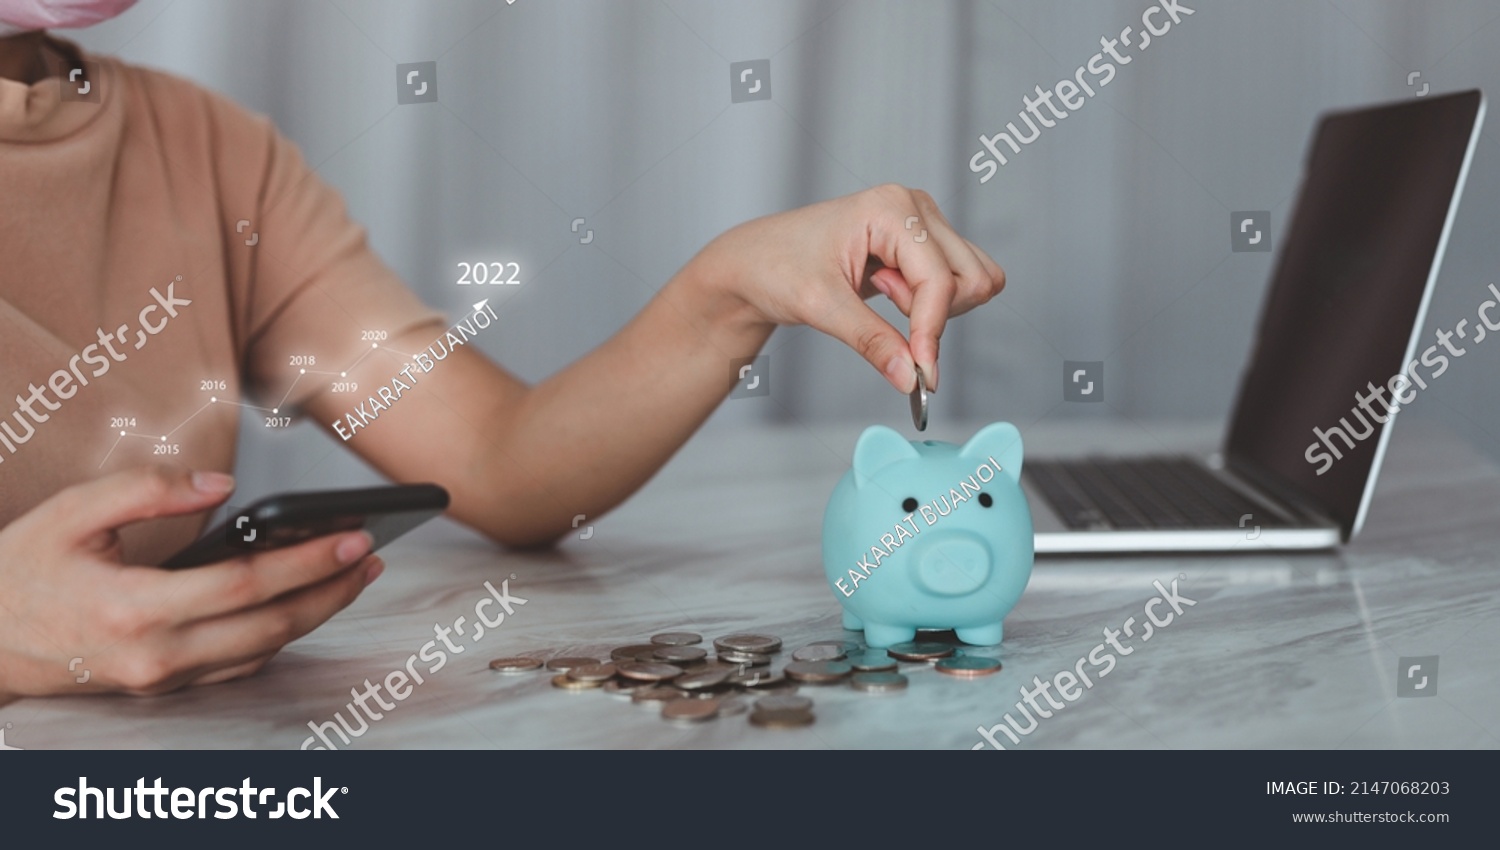 money saving concept Close your hands and put coins in the piggy bank for saving money. A smart woman holds a silver coin and prepares to put it in a piggy bank. with annual graph #2147068203